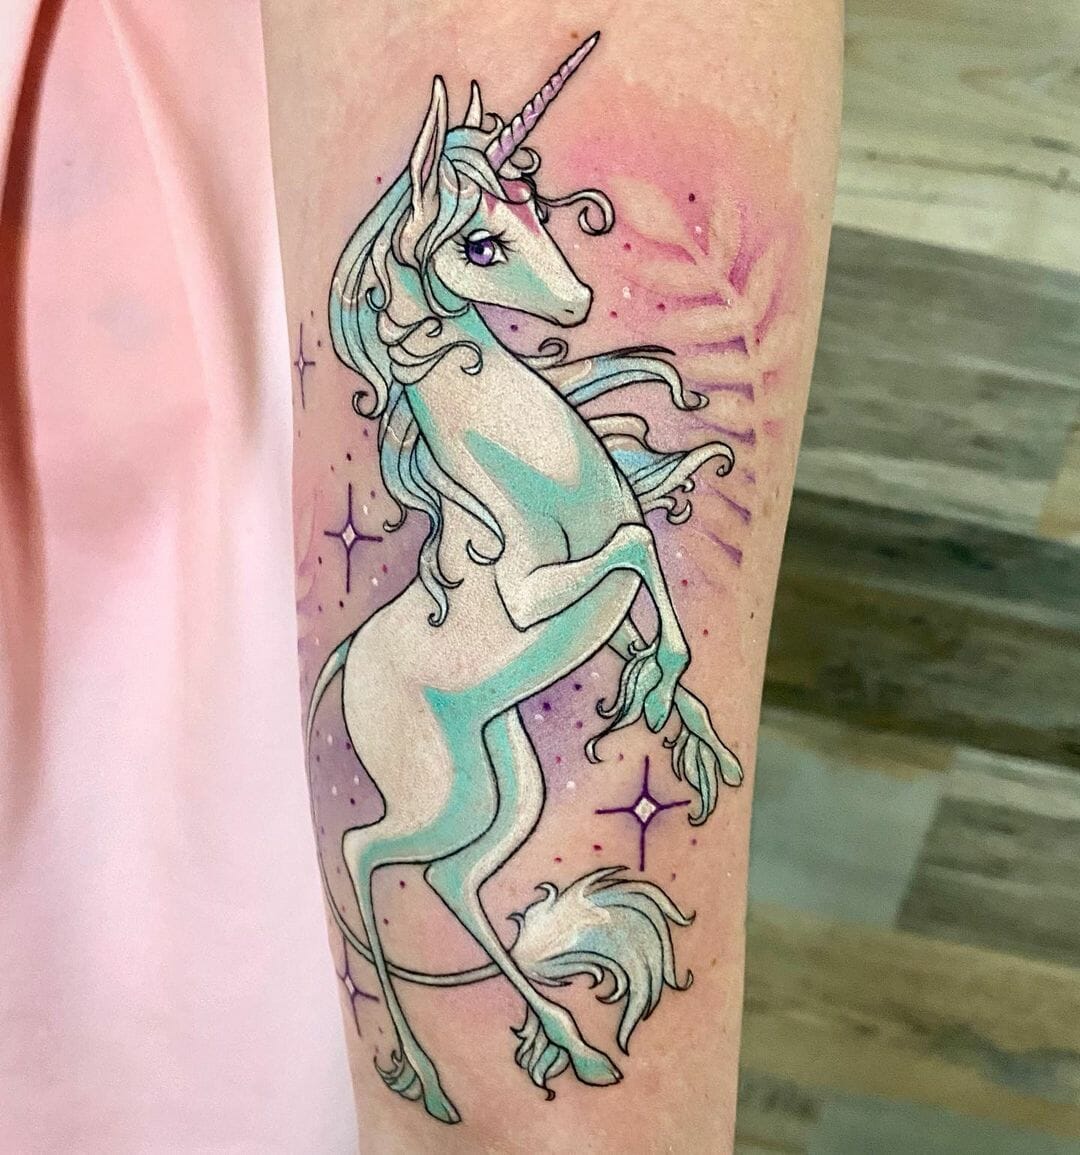 Amazon.com: Unicorn Temporary Tattoos for Children Kids  Girls(45Sheets),Konsait Great Girls Fake Stickers Waterproof Rainbow Unicorn  Kids Birthday Party Favors Decorations Birthday Party Gift Bag Fillers :  Toys & Games